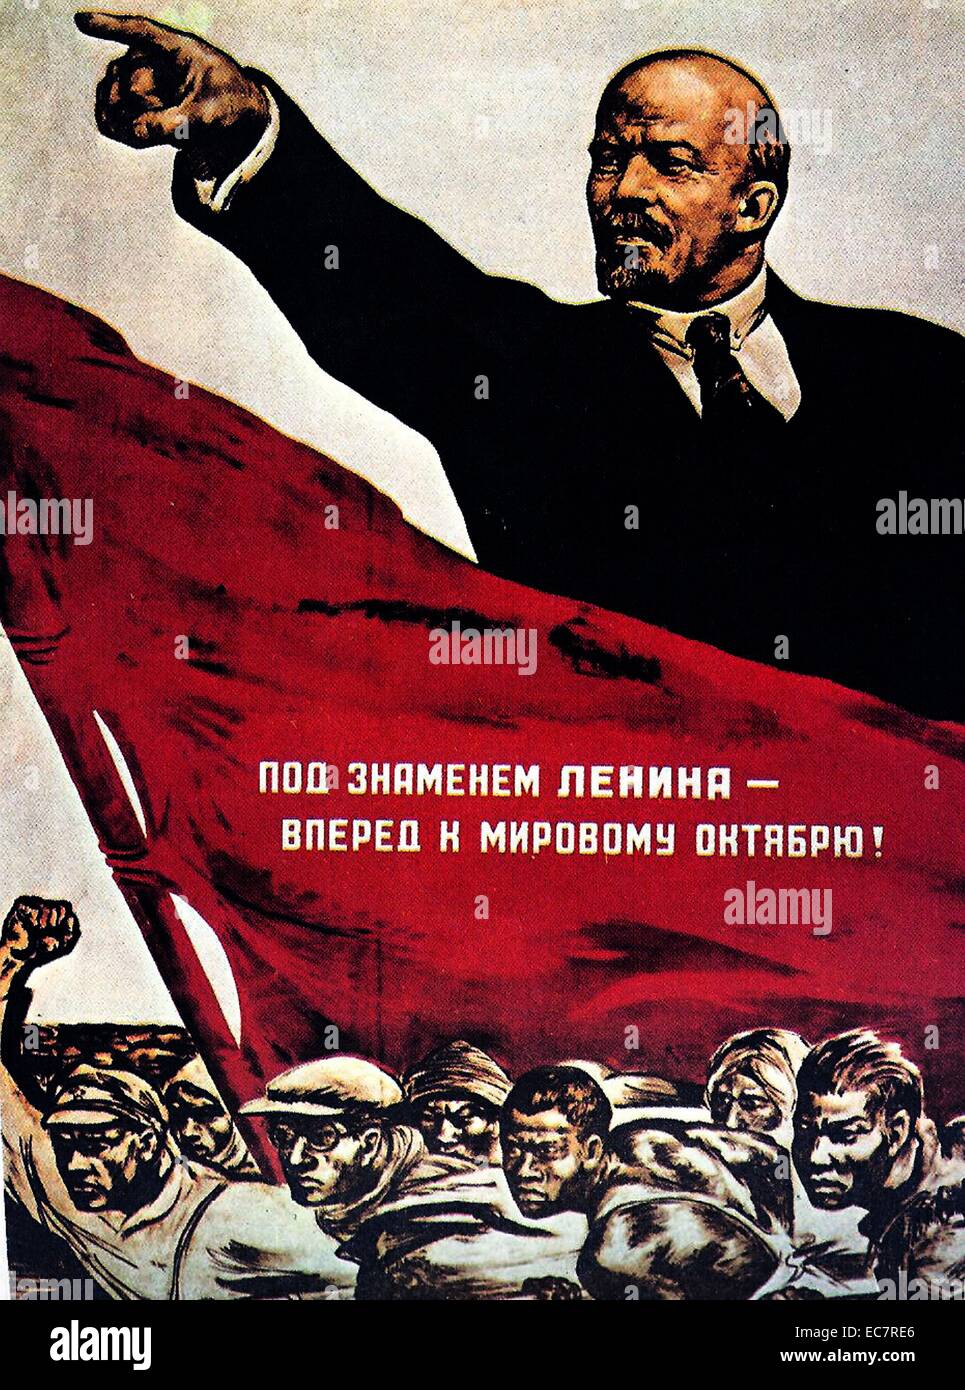 Russian Propaganda from the Bolshevik era showing Lenin pointing. The Bolsheviks became the Communist Party of the Soviet Union and considered themselves the leaders of the revolutionary working class of Russia. Stock Photo